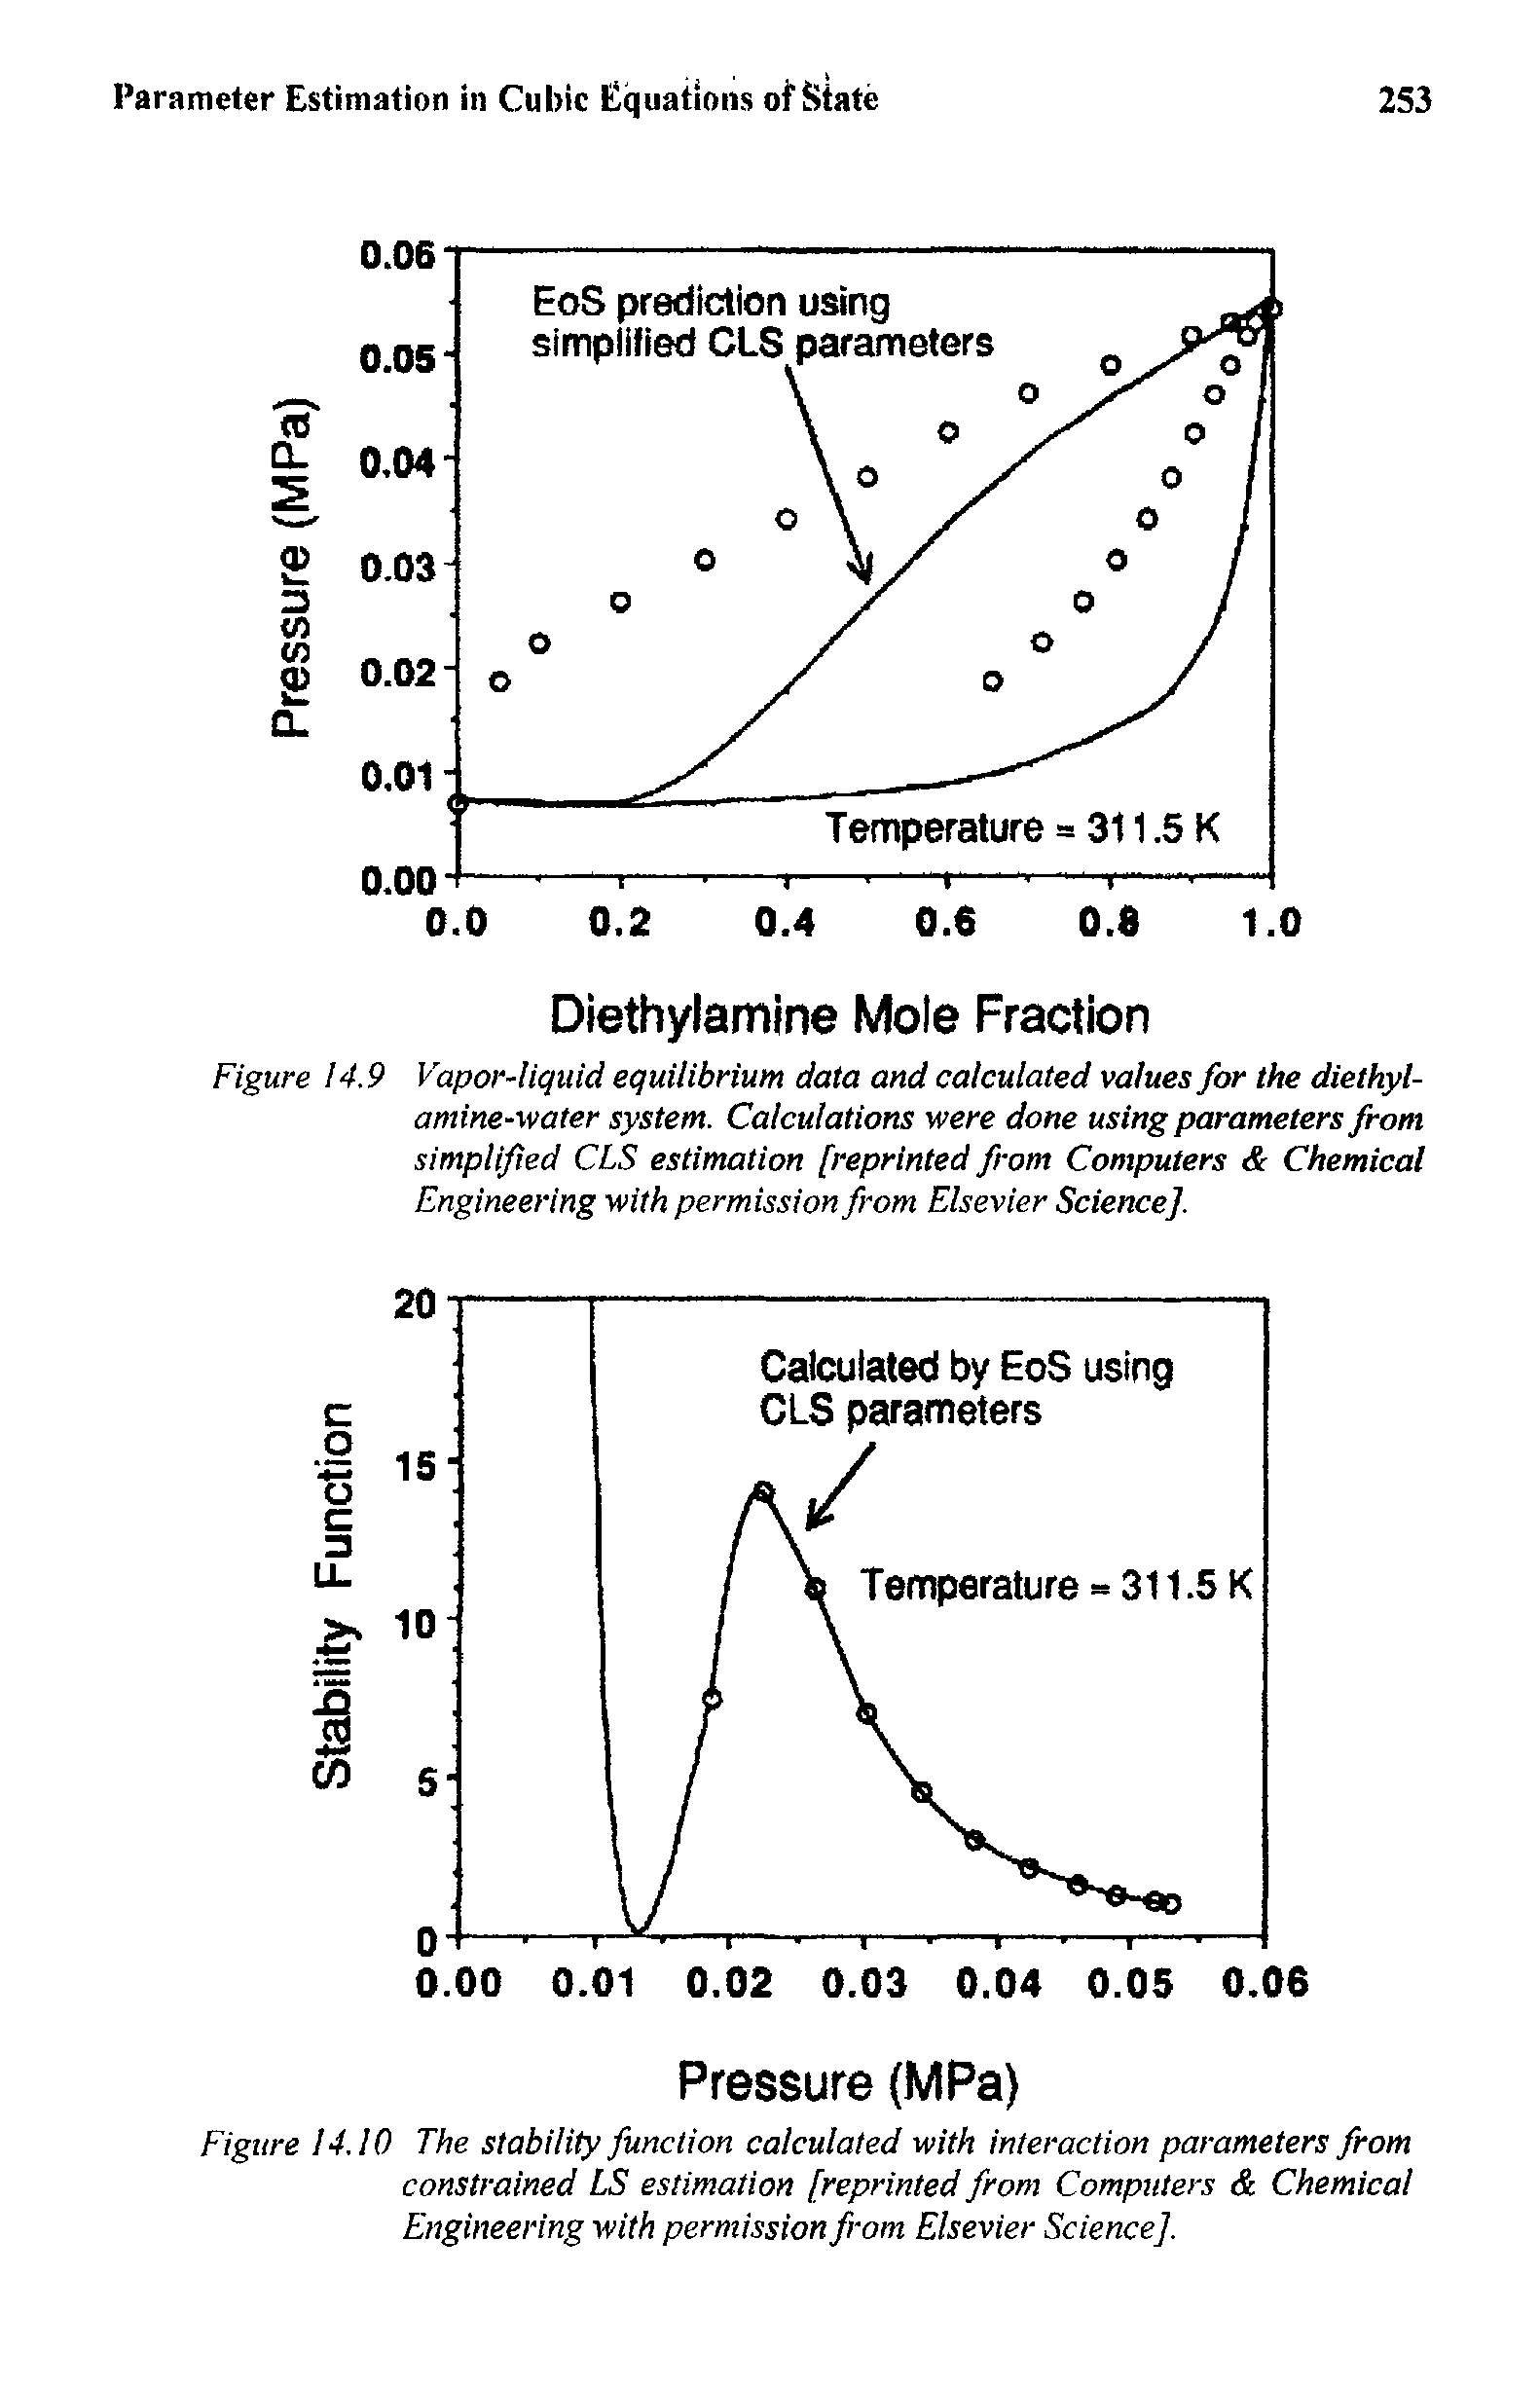 Figure 14.9 Vapor-liquid equilibrium data and calculated values for the diethyl-amine-water system. Calculations were done using parameters from simplified CLS estimation [reprinted from Computers Chemical Engineering with permission from Elsevier Science],...